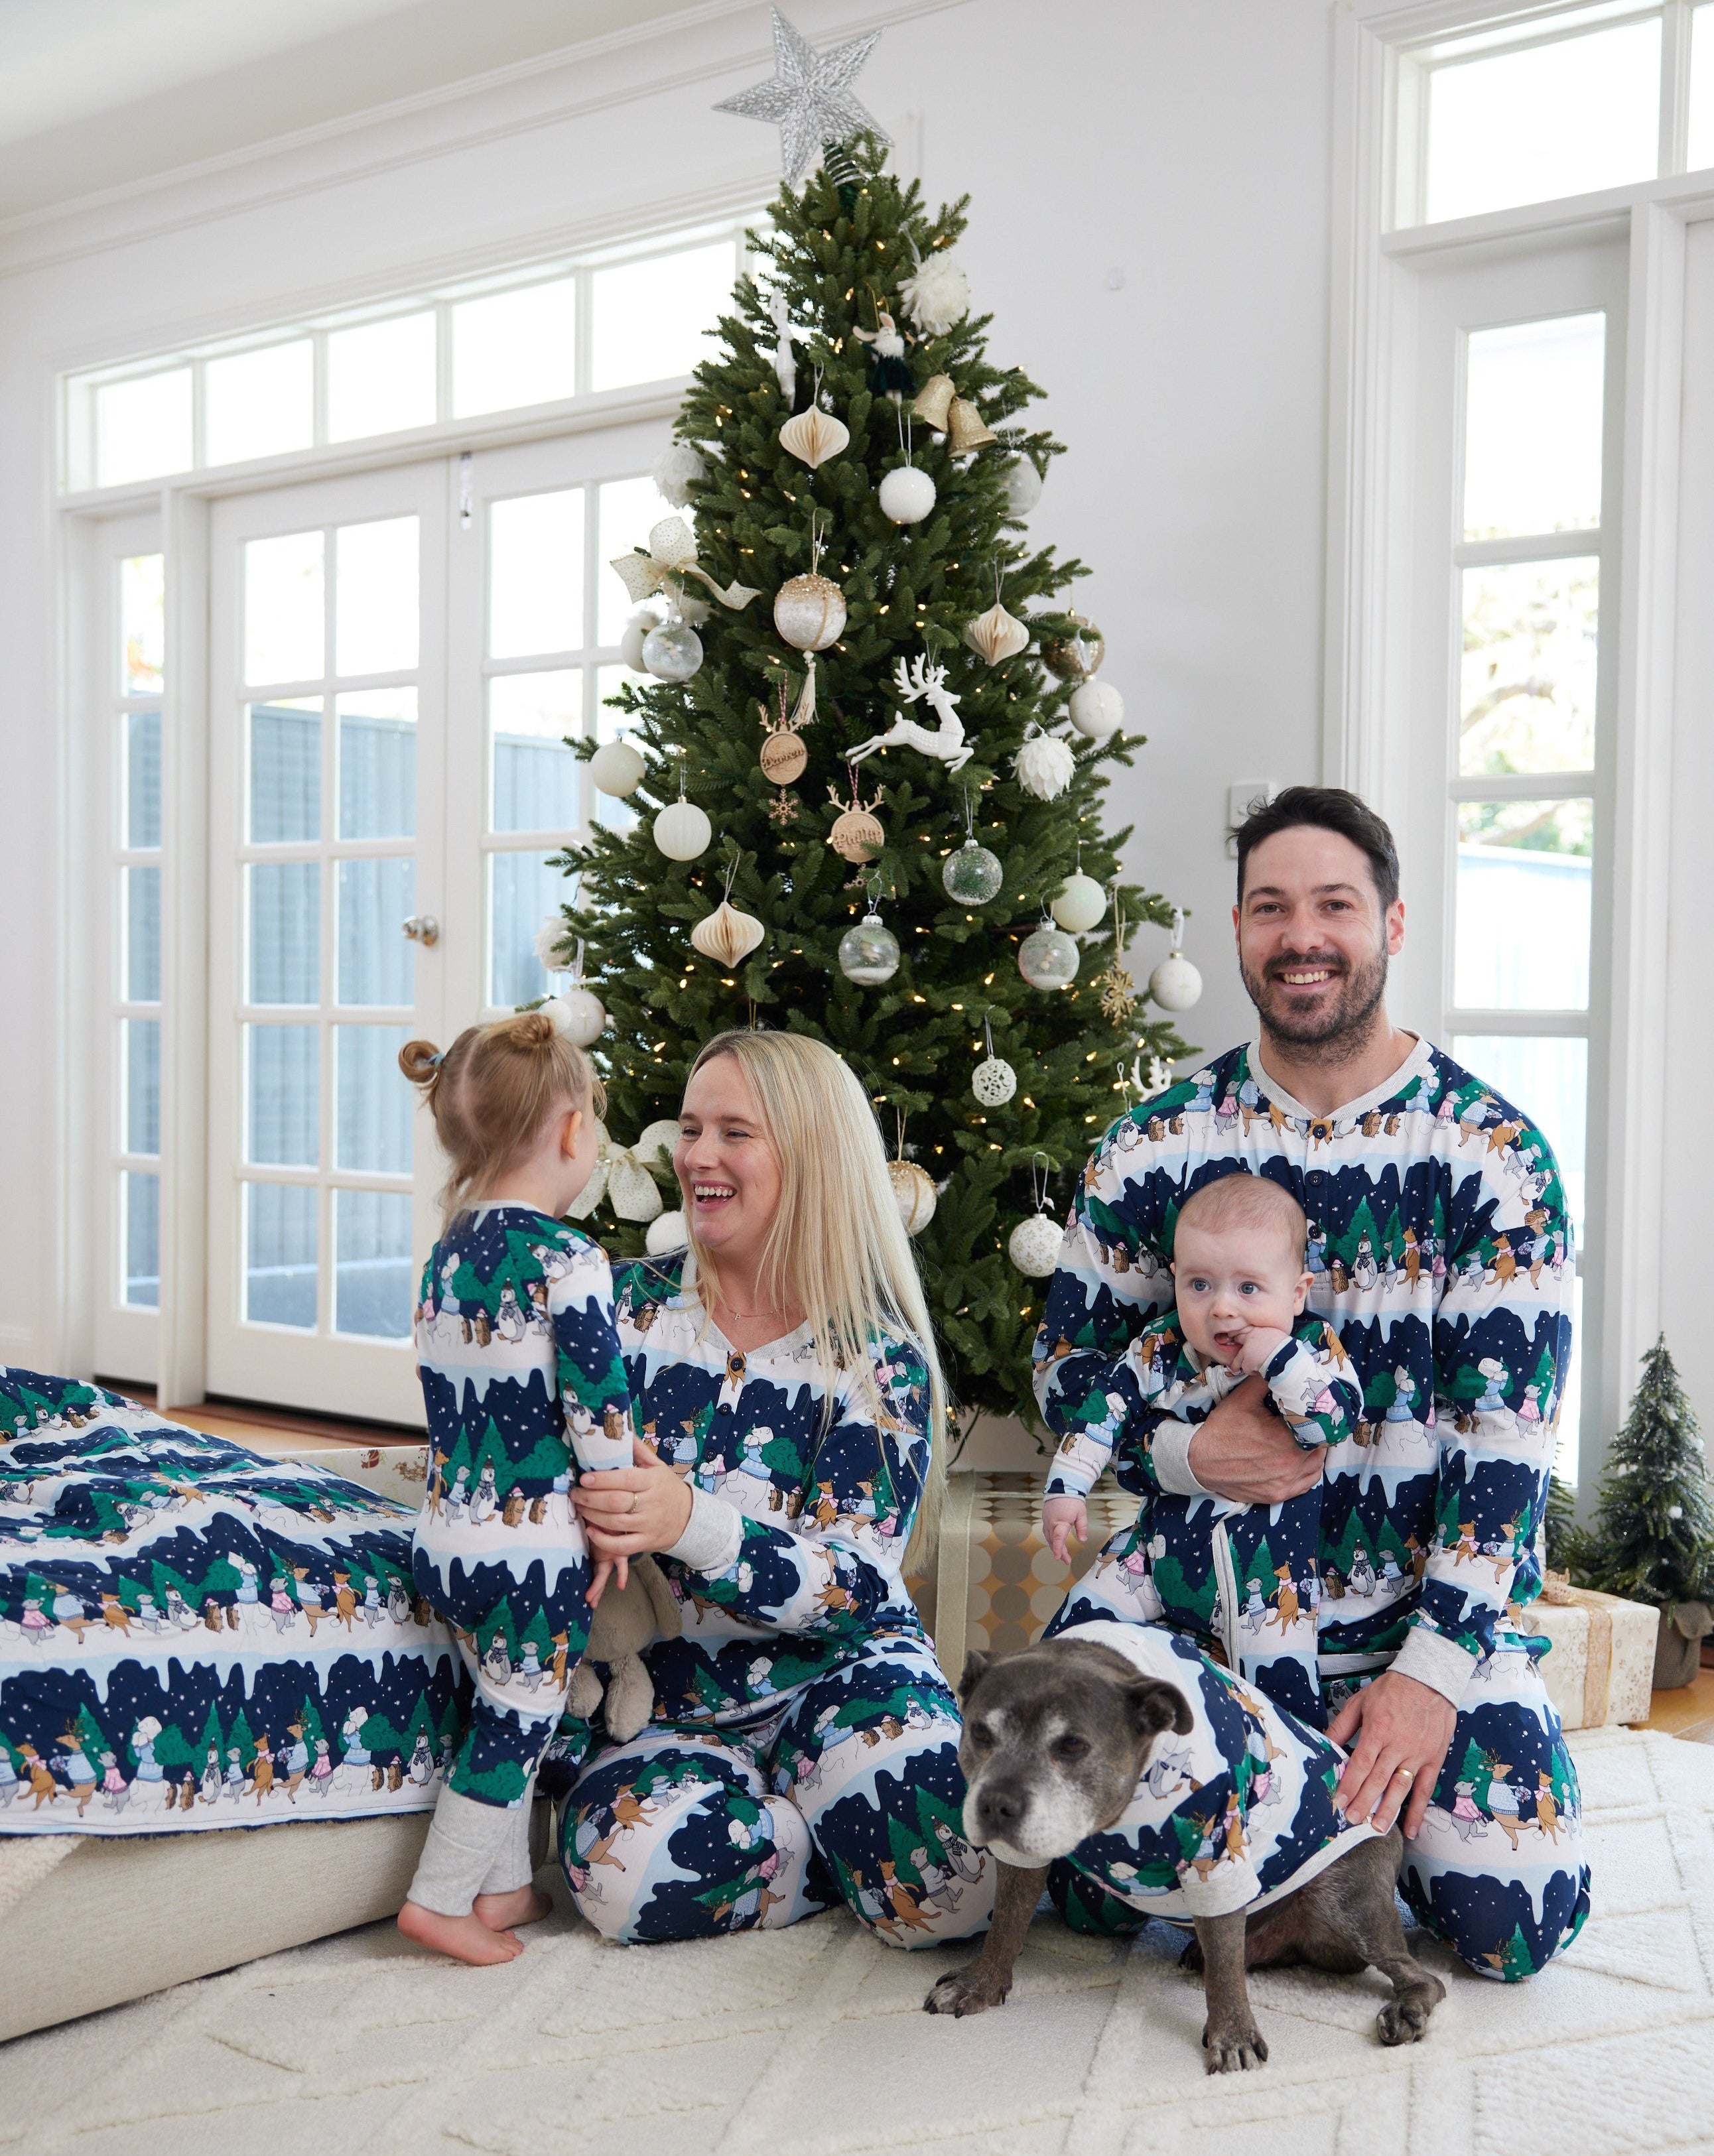 Darren and Phillip Christmas pyjamas for the whole family.